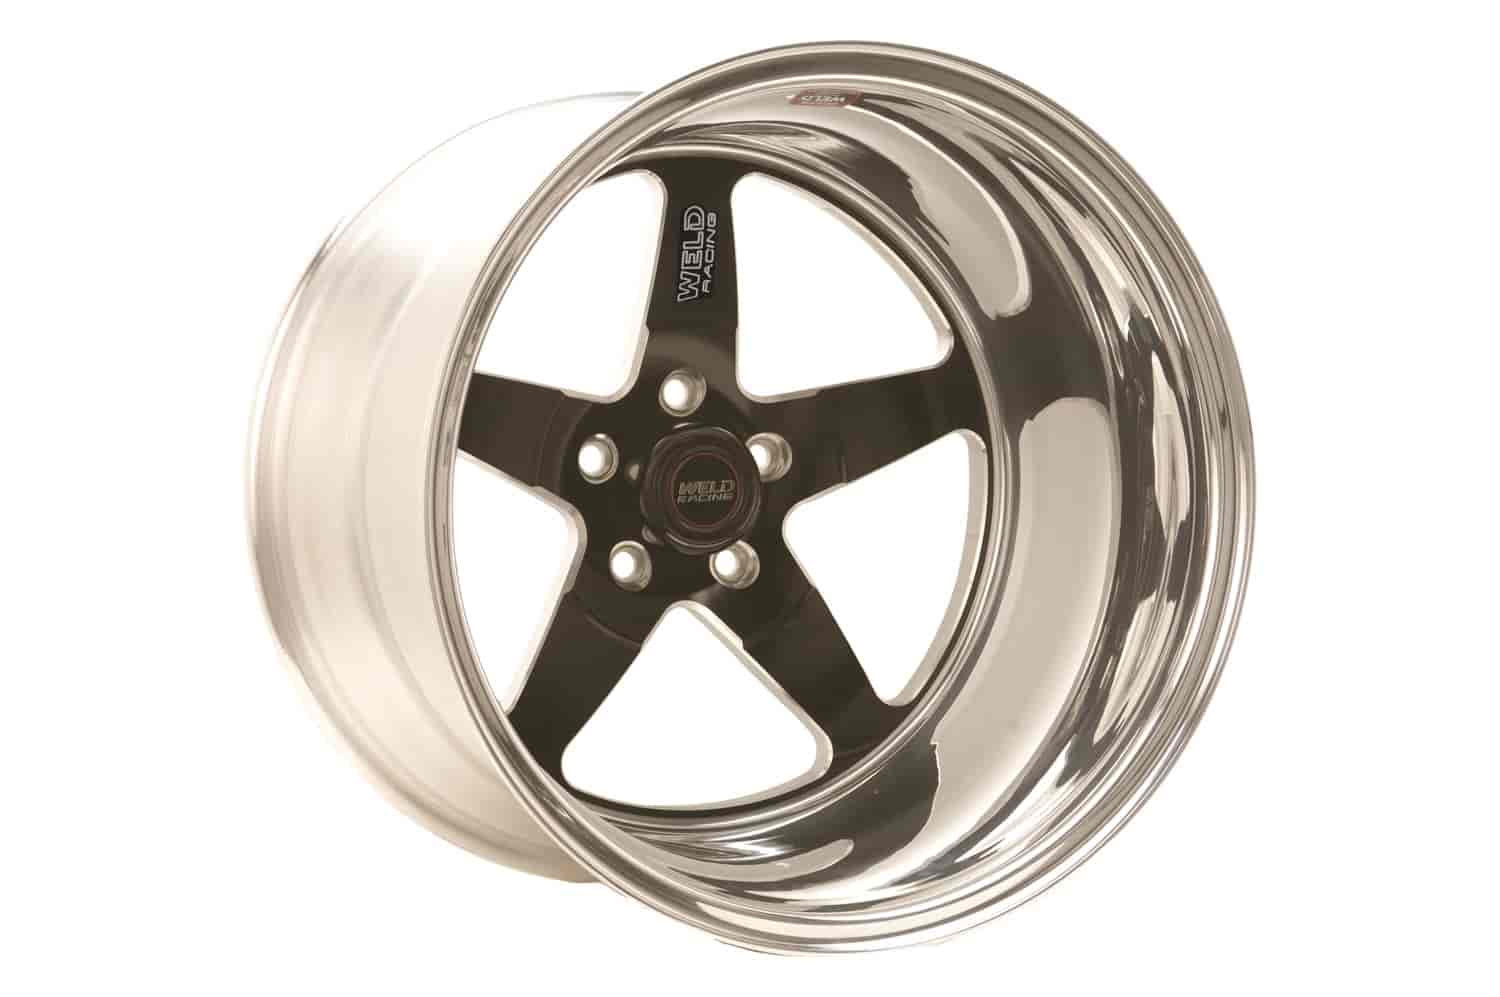 RT-S Series S71 Wheel Size: 15" x 10" Bolt Circle: 5 x 4-1/2" Back Space: 3-1/2"